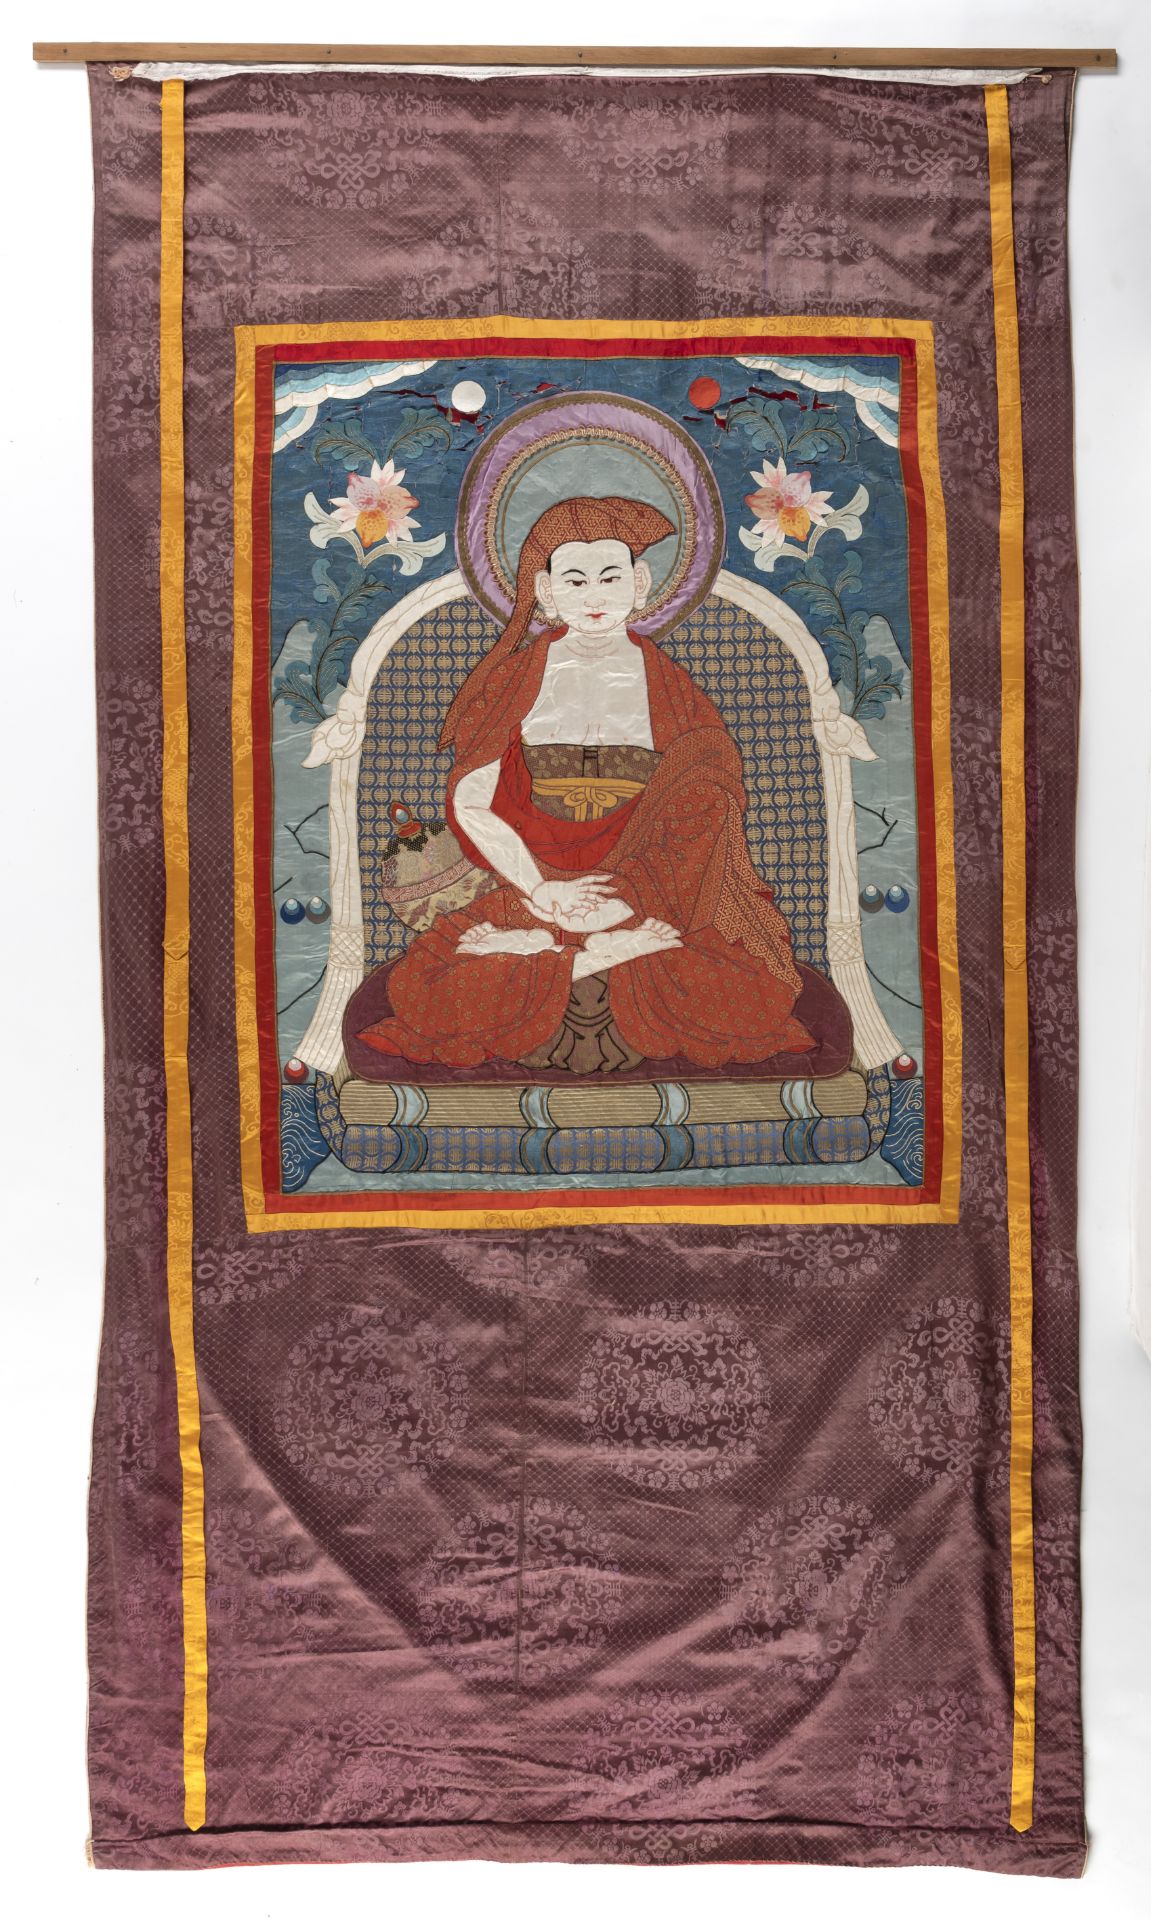 A RARE AND VERY LARGE SILK THANGKA WITH ONE OF THE NINE MAHAYANA GURUS - Image 2 of 3